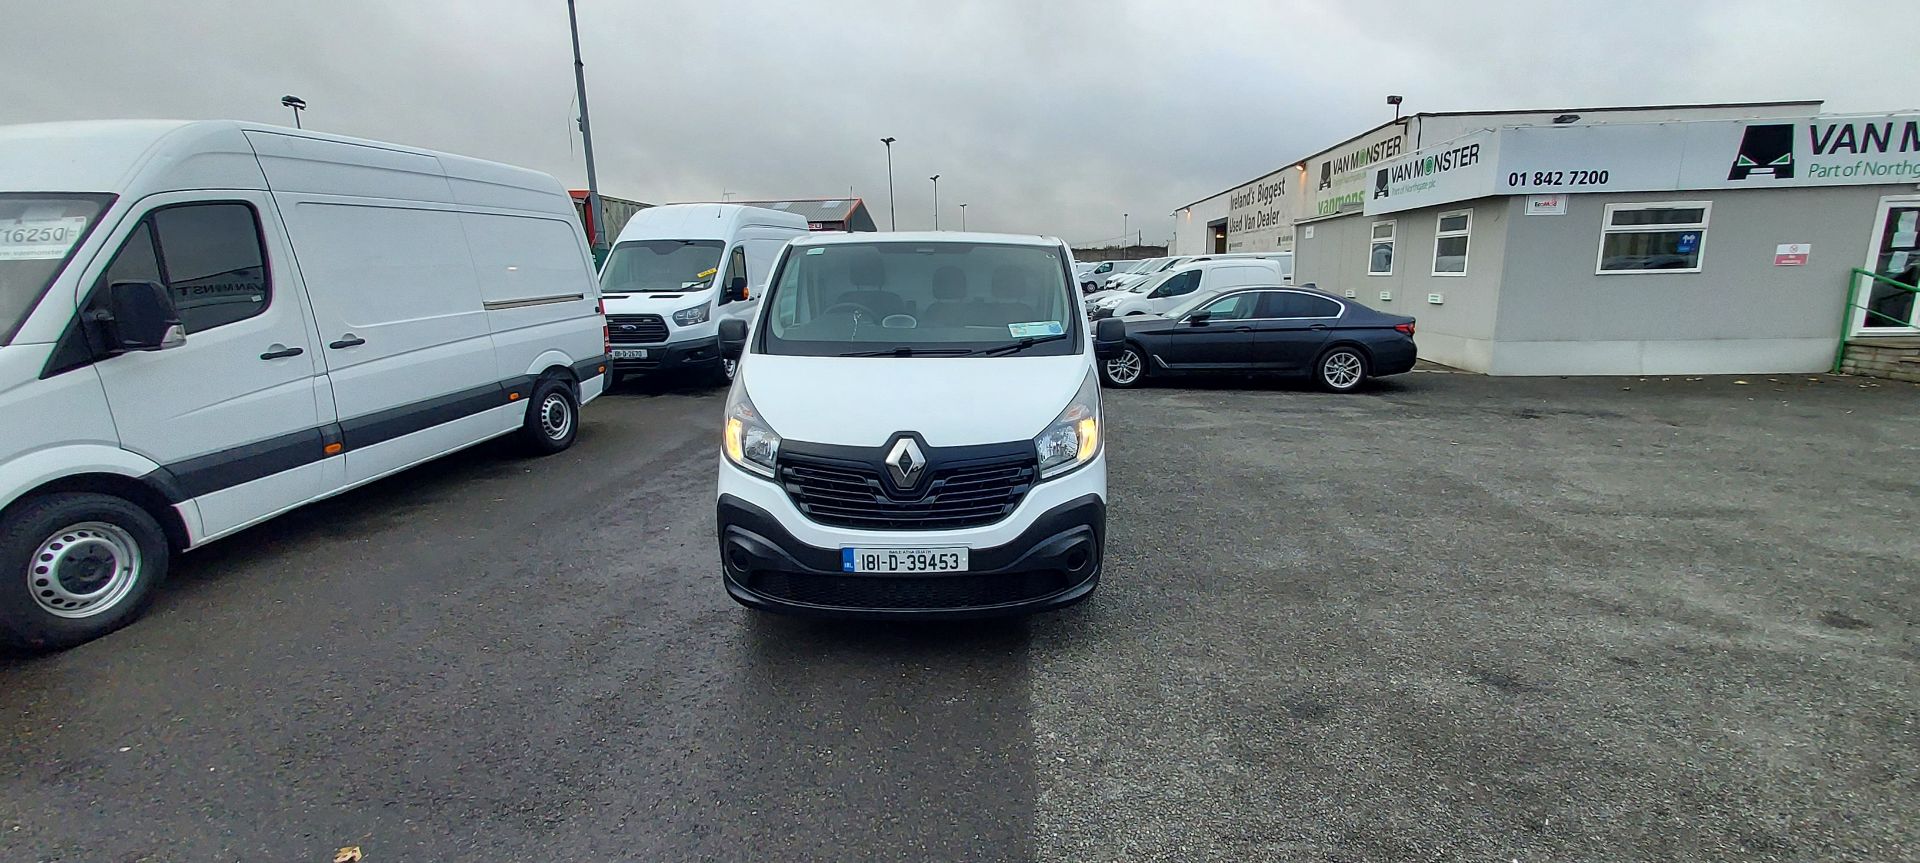 2018 Renault Trafic LL29 DCI 120 Business 3DR (181D39453) Thumbnail 2